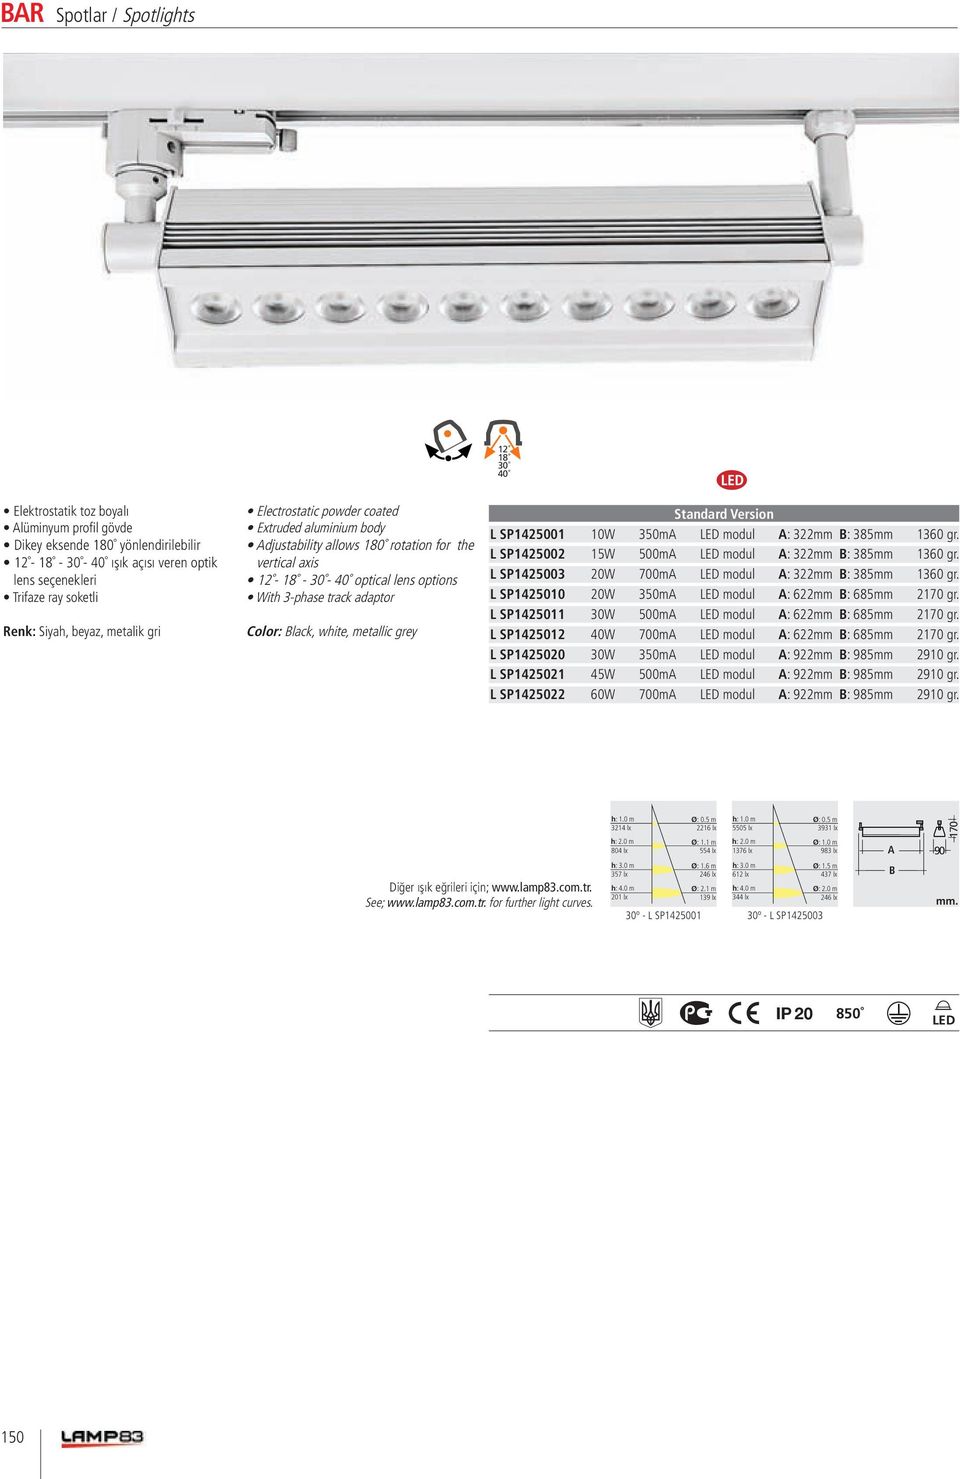 vertical axis 12-18 - - 40 optical lens options L SP1425003 20W 700mA LED modul A: 322mm B: 385mm 1360 gr. With 3-phase track adaptor L SP1425010 20W 350mA LED modul A: 622mm B: 685mm 2170 gr.